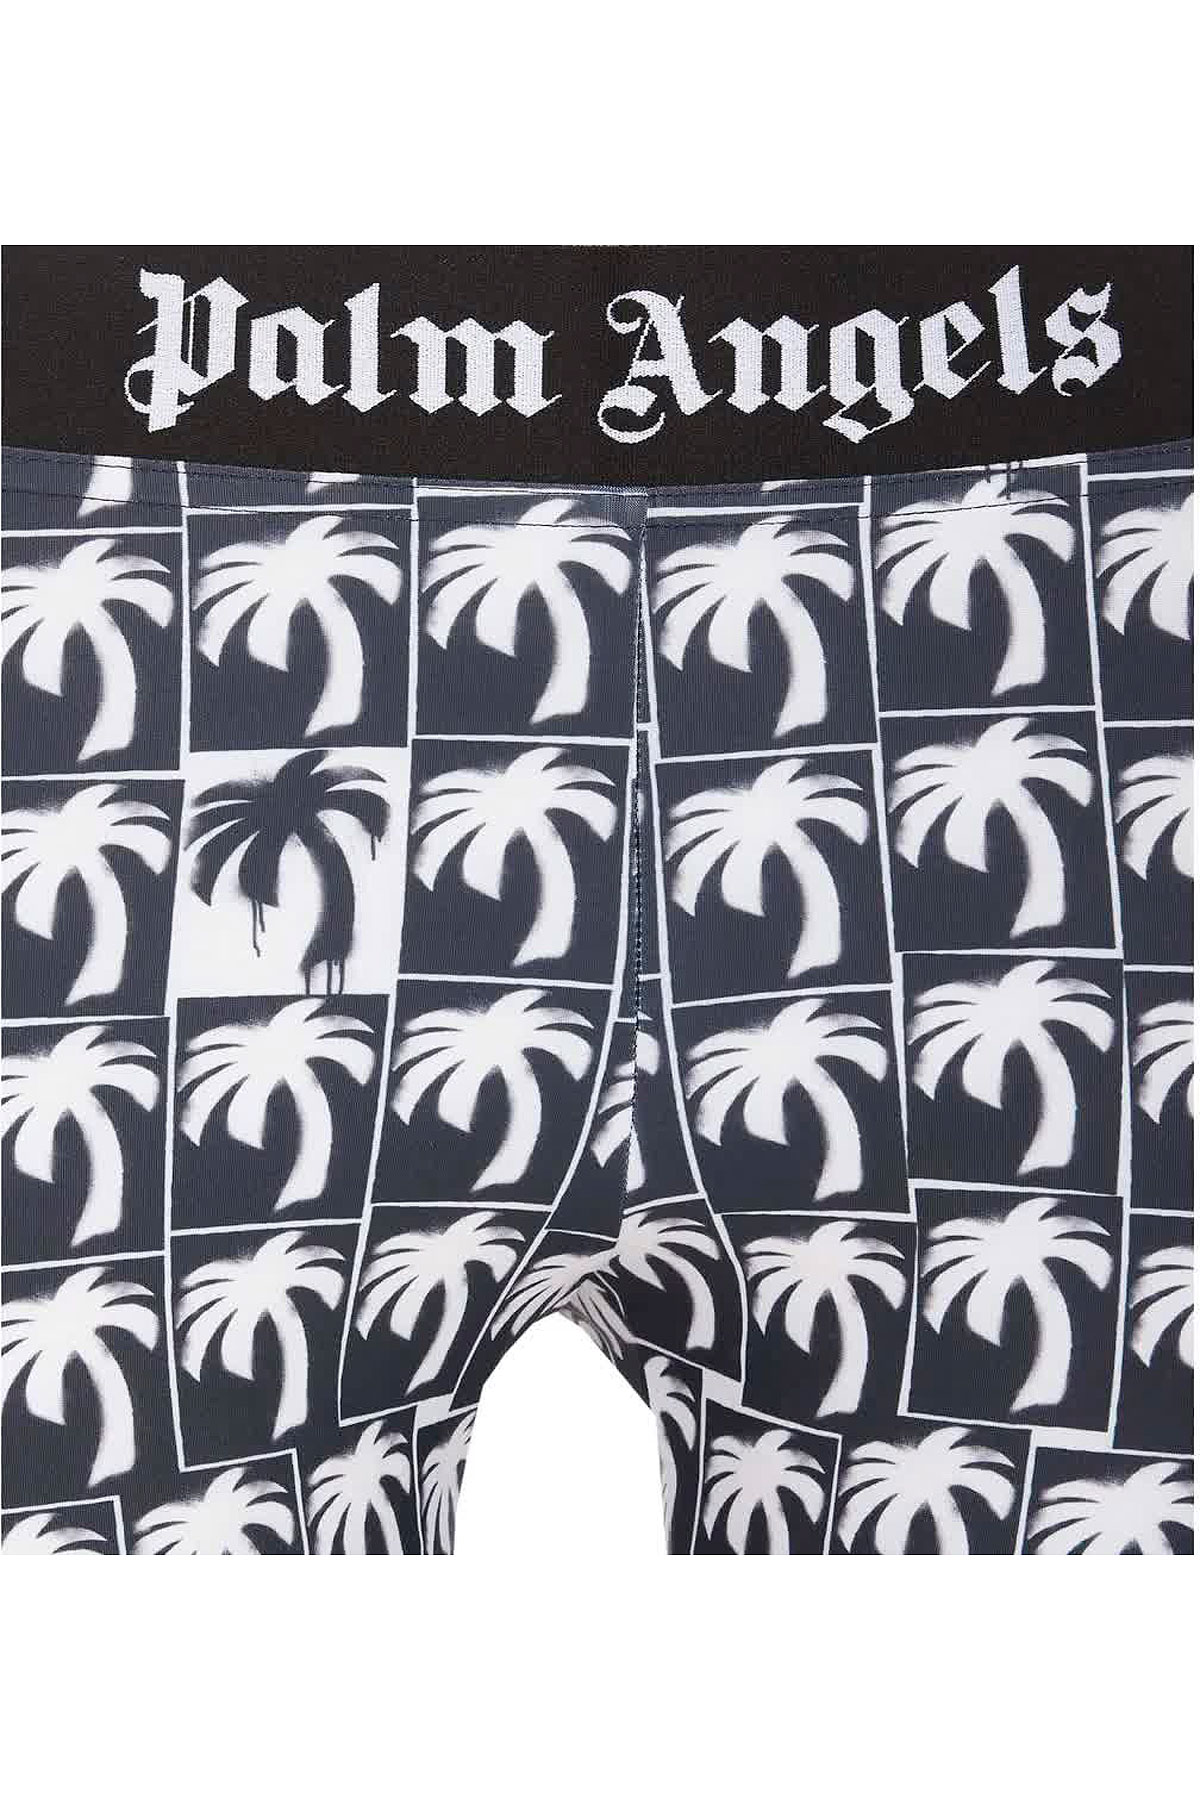 Womens Clothing Palm Angels, Style code: pwed018f23fab001-1001